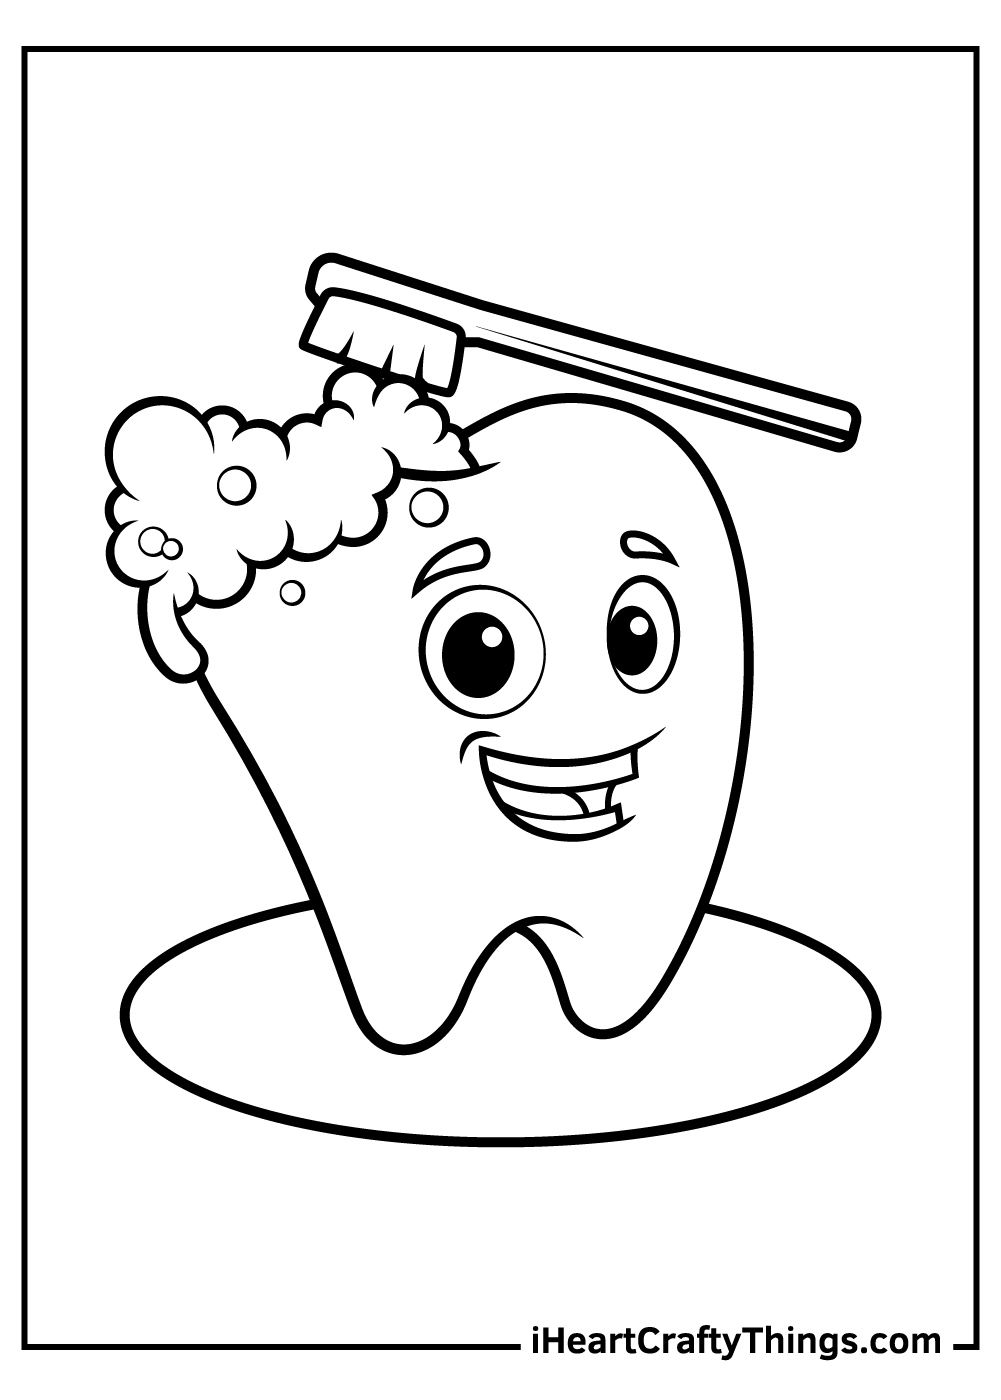 Tooth coloring pages free printables